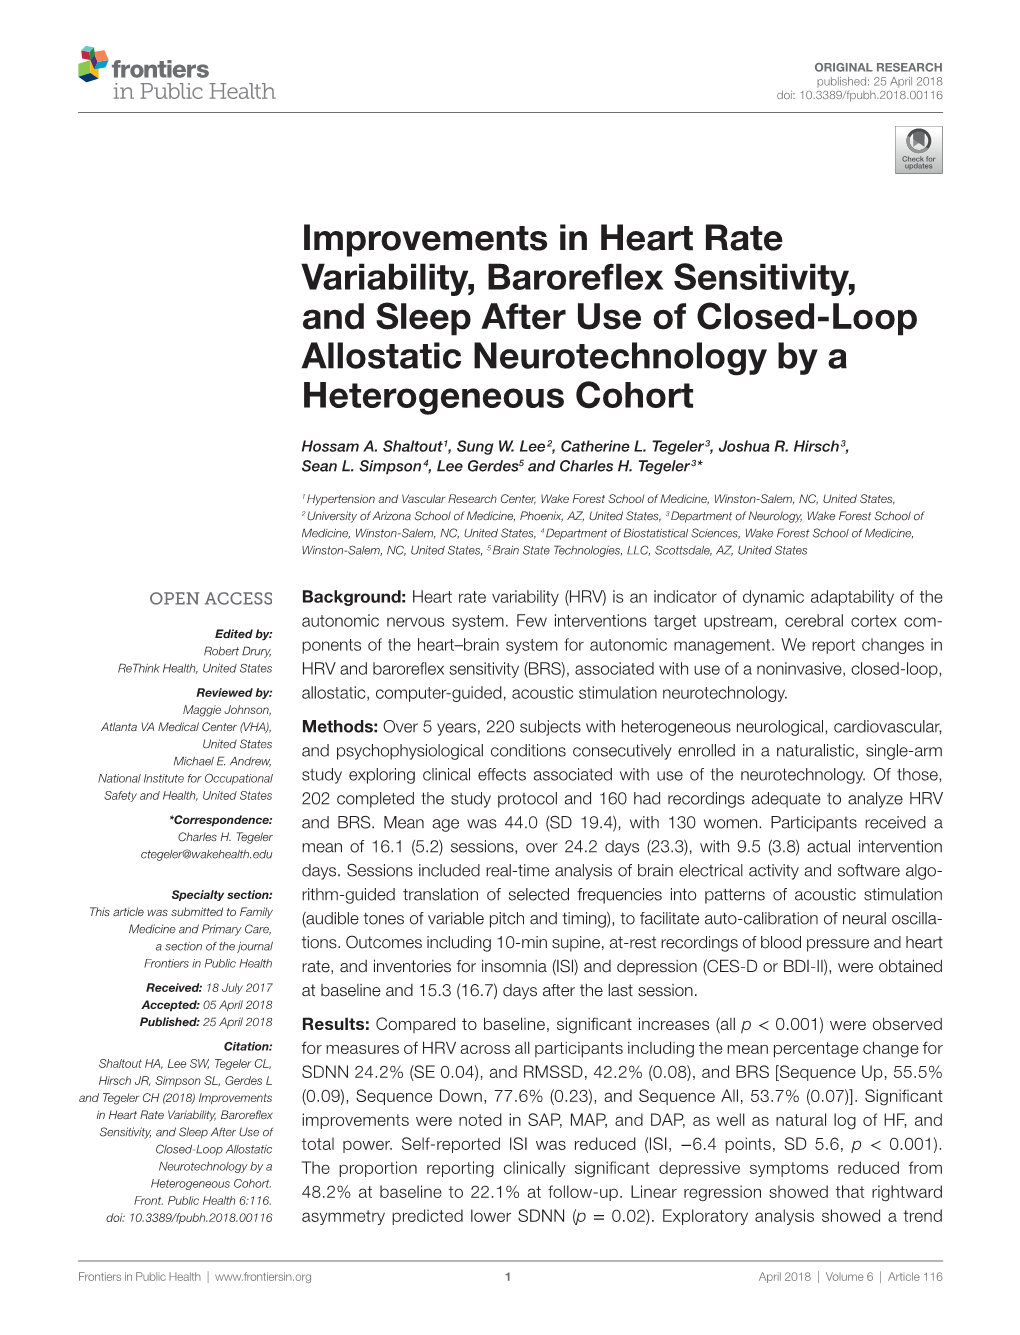 Improvements in Heart Rate Variability, Baroreflex Sensitivity, and Sleep After Use of Closed-Loop Allostatic Neurotechnology by a Heterogeneous Cohort